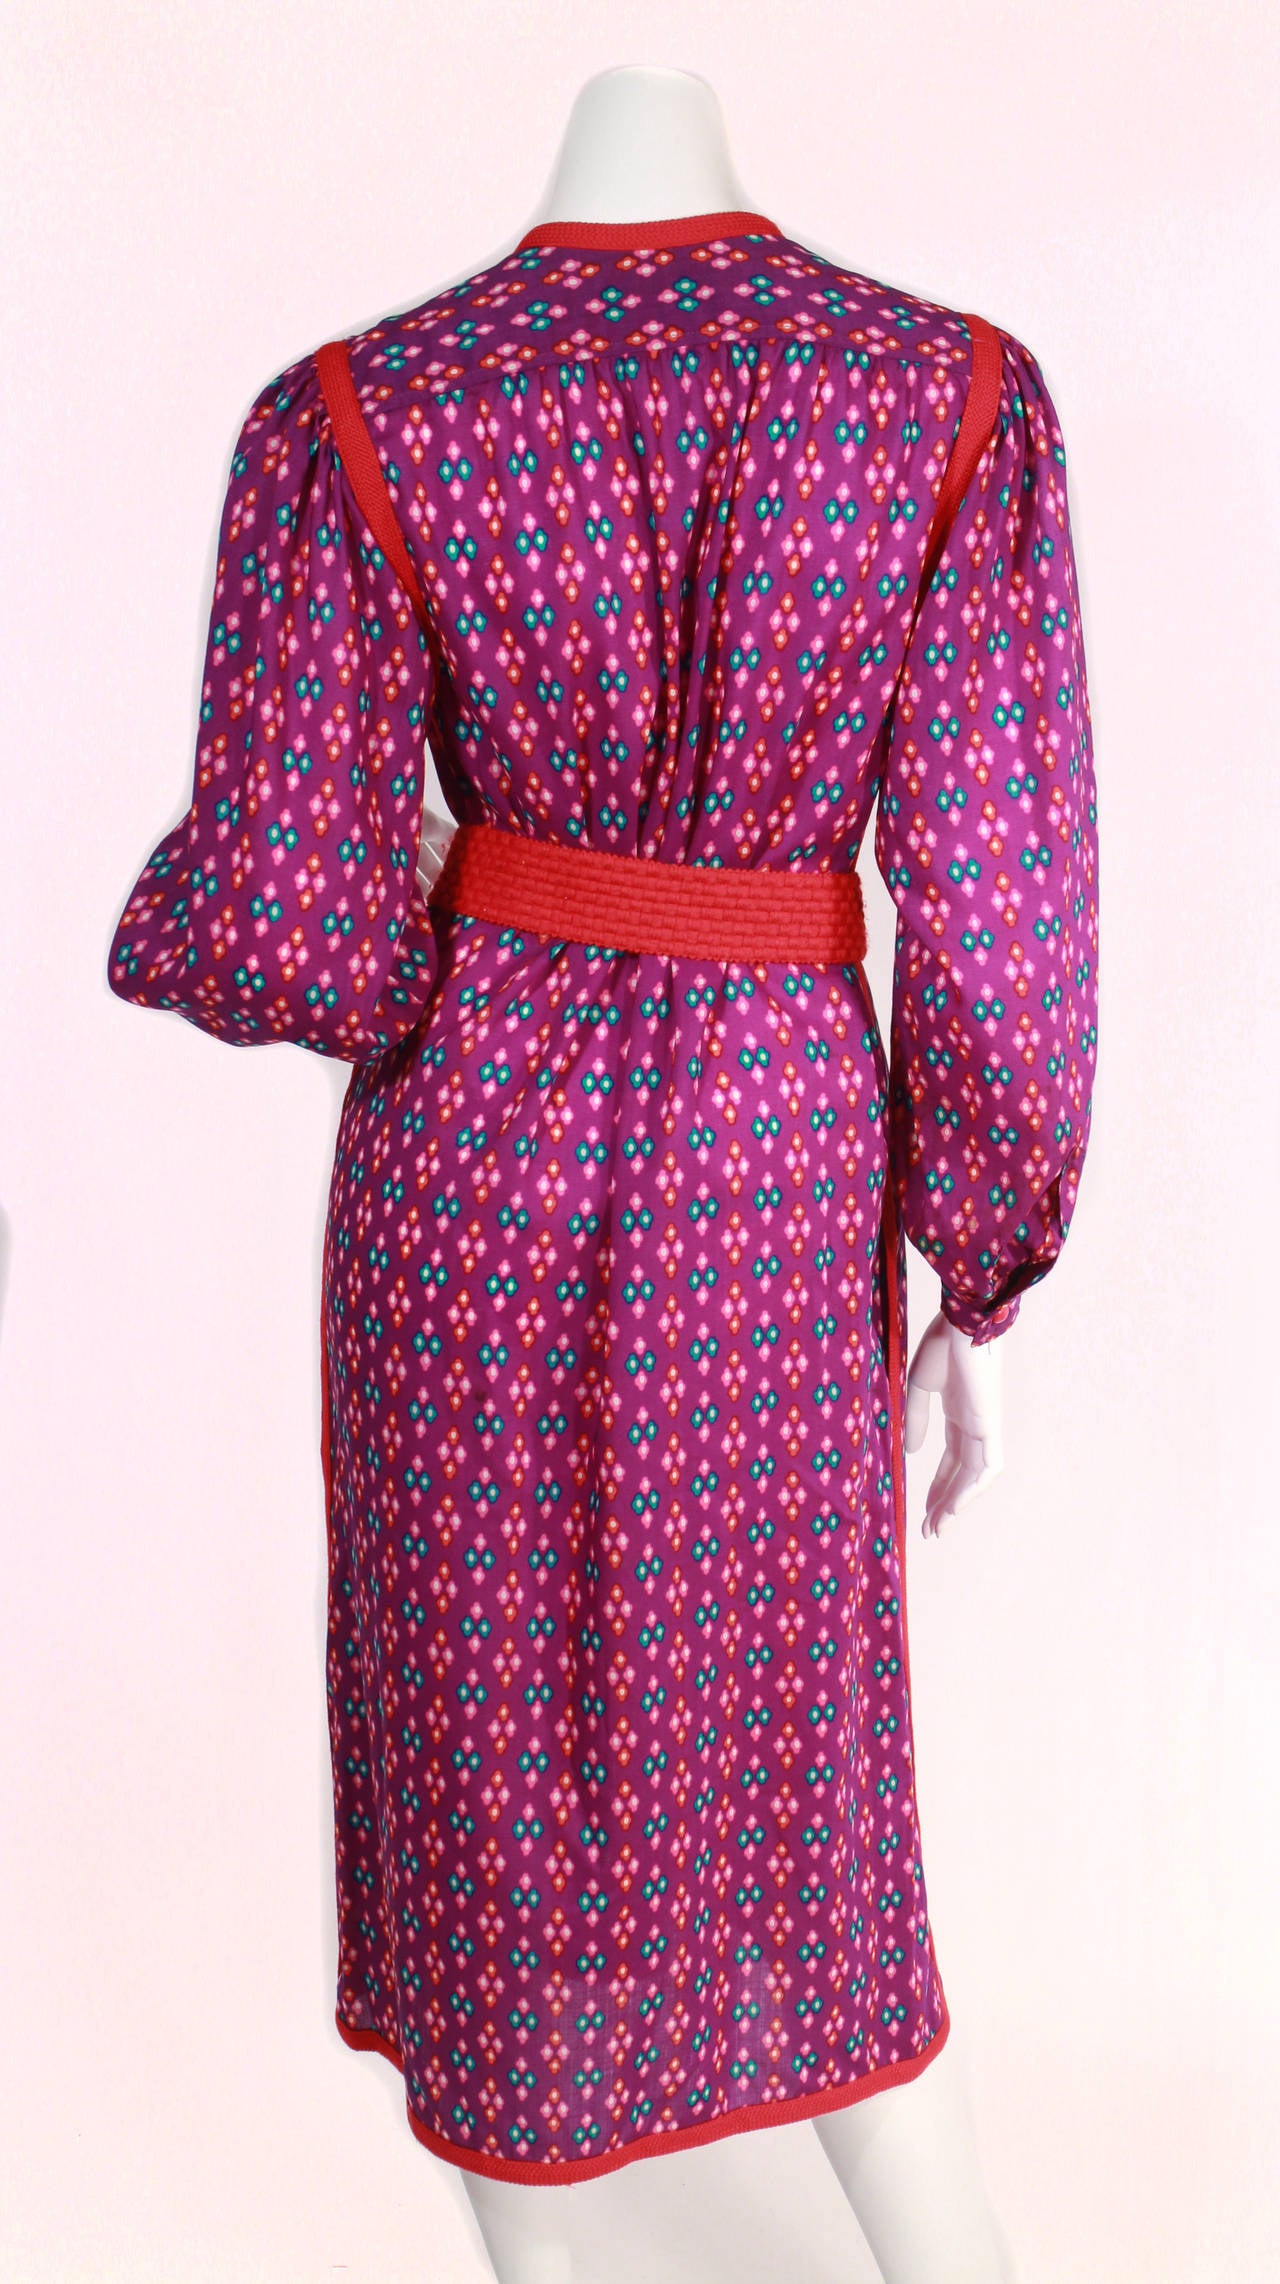 Early Yves Saint Laurent peasant dress. 

Mint condition early YSL peasant/caftan dress featuring a vibrant purple, red and pink print, lined in red wool, has pockets, buttoned cuffs, and neckline.